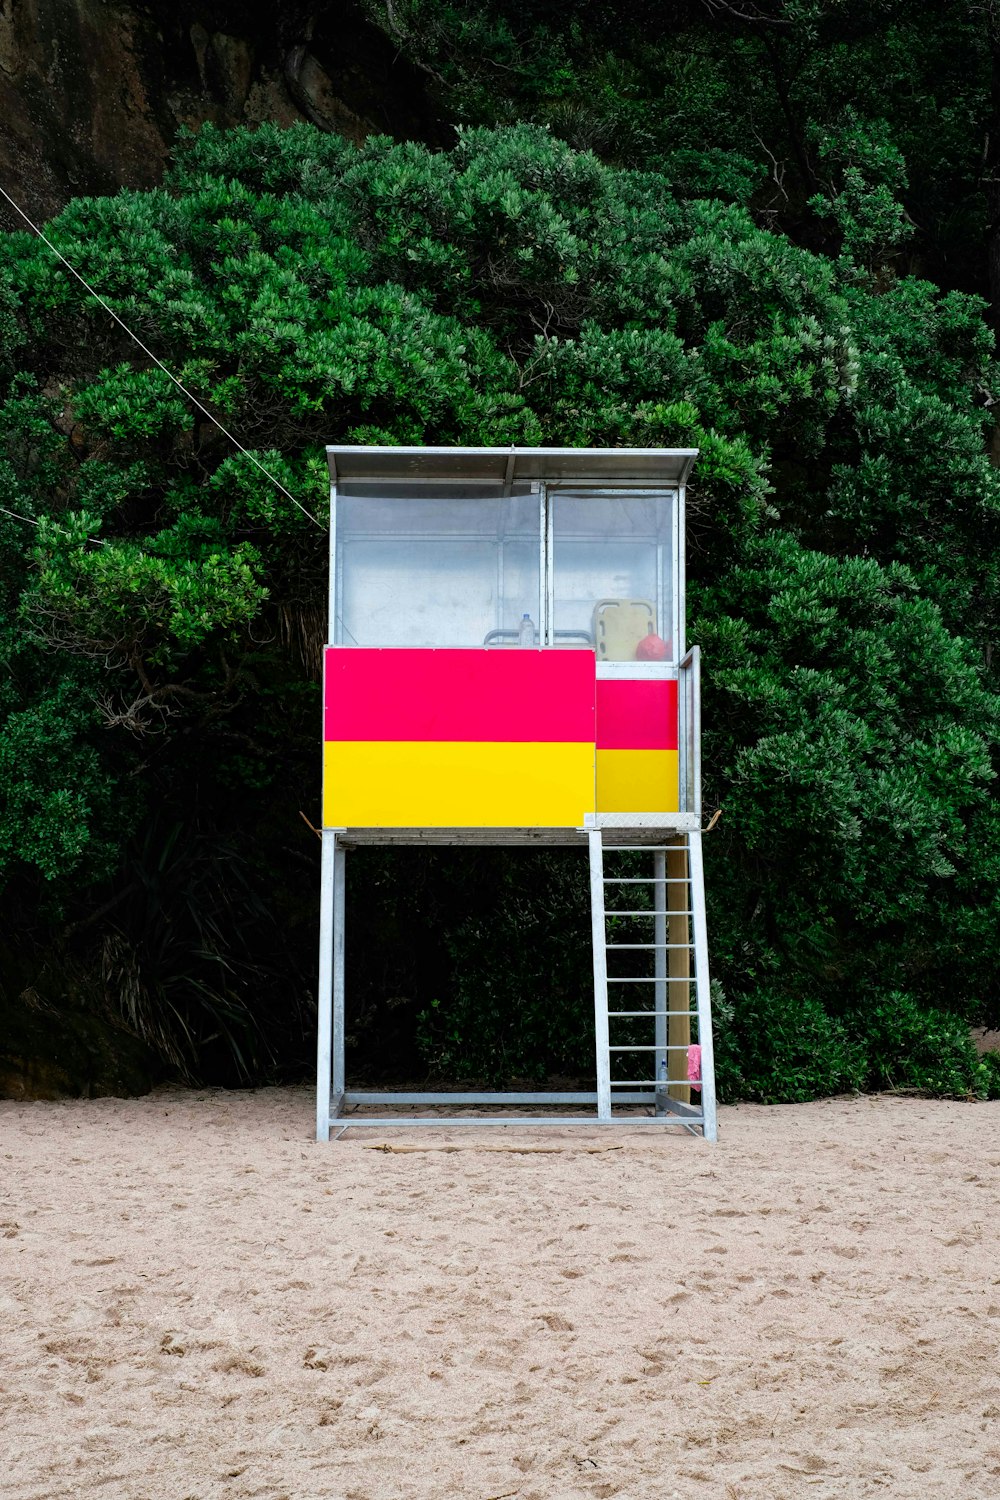 stainless steel lifeguard house beside green tree